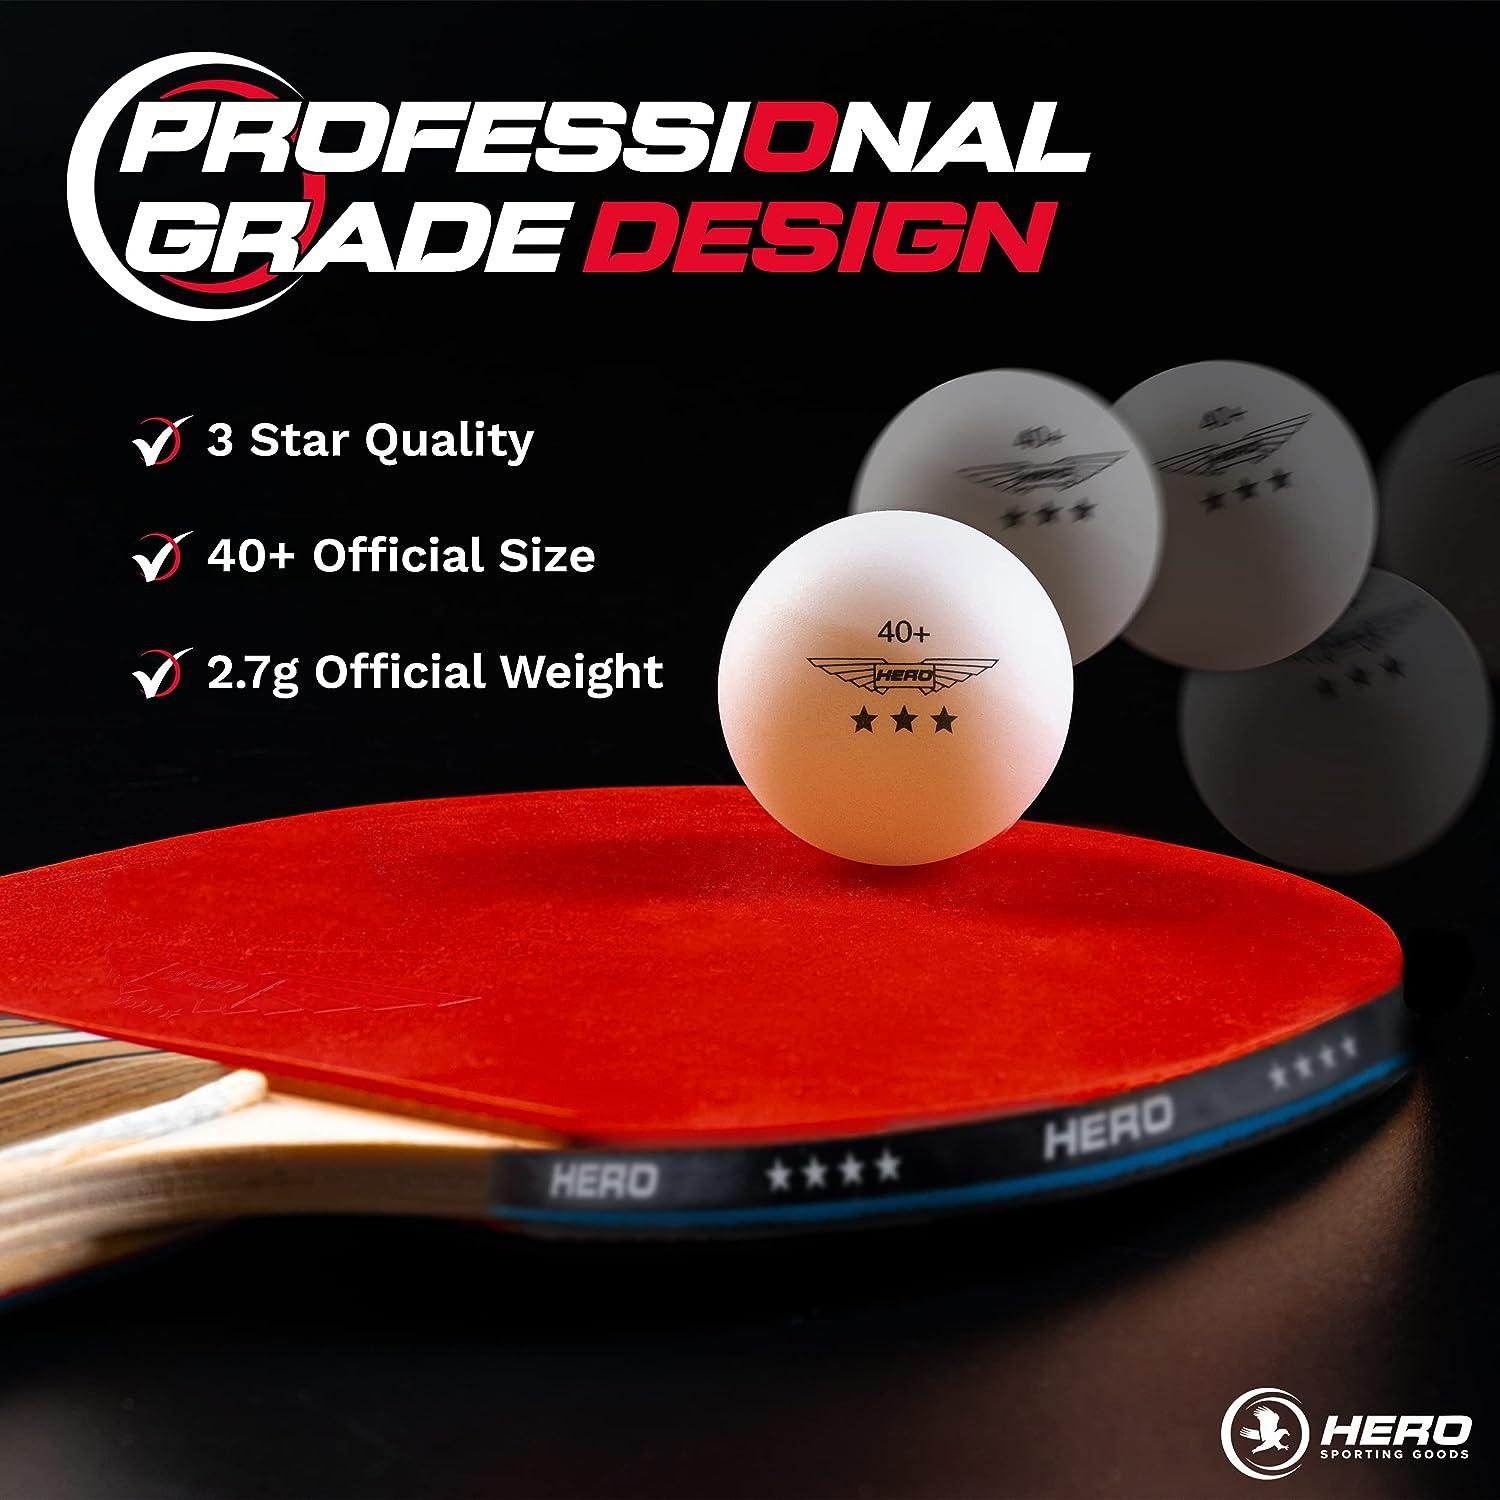 Ping Pong Balls - Premium 3-Star Table Tennis Balls - Pack of 12 Table Tennis Balls White and Orange - High Performance 3 Star Ping Pong Balls - 40+ Official Size and Weight